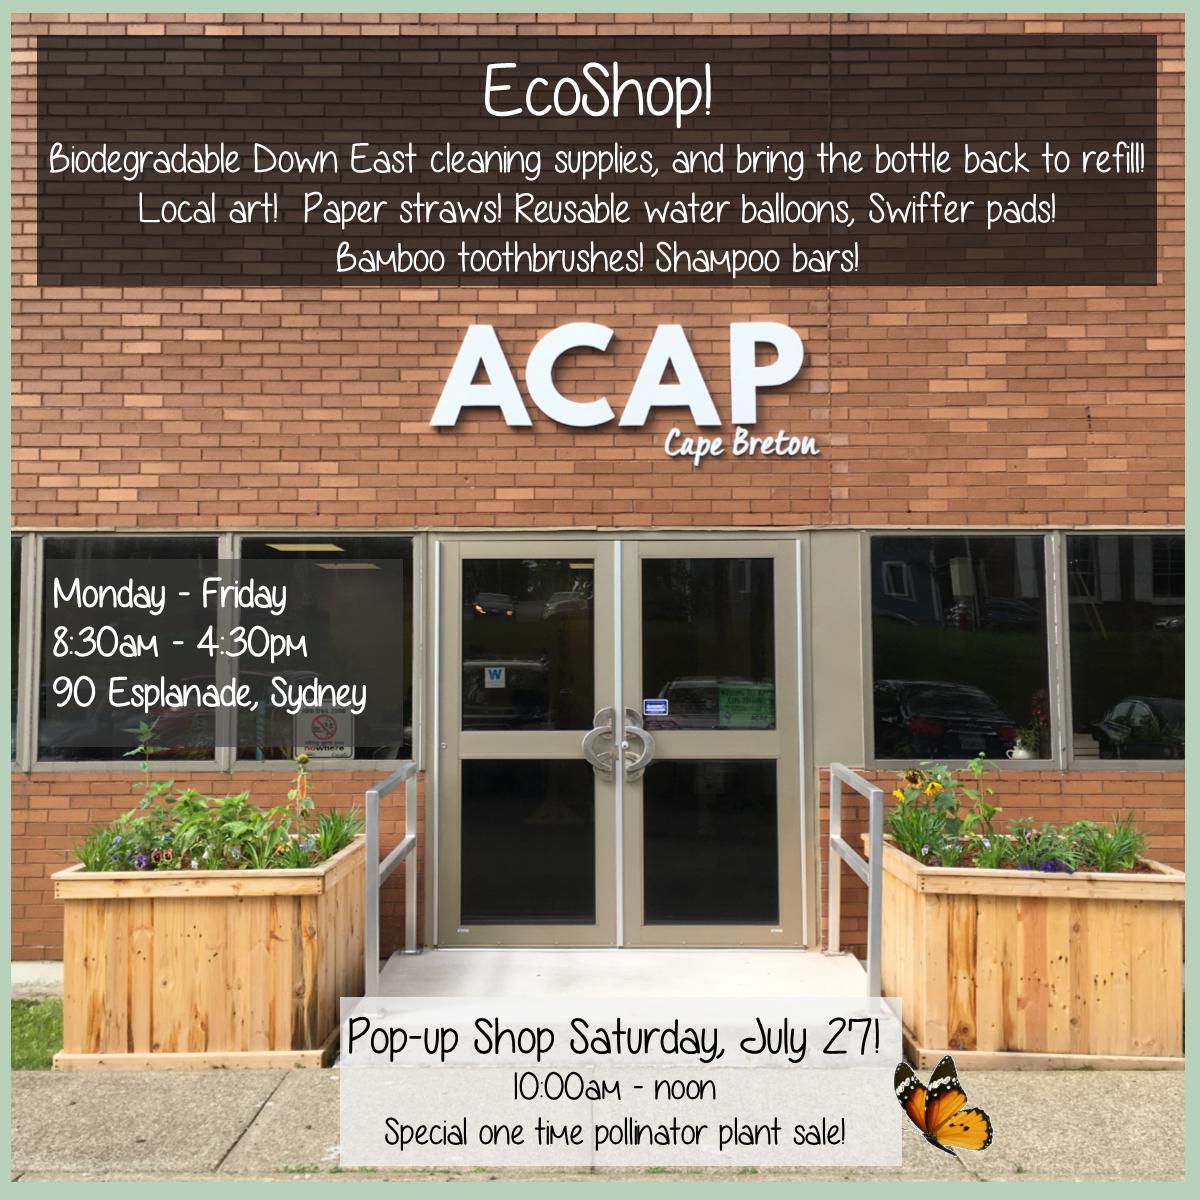 We know it's tough to get into the EcoShop when your work hours are the same as ours so we're having a pop-up shop this Saturday from 10-noon! 🦋 In addition to our usual eco-alternatives we'll have pollinator plants available! 🐝